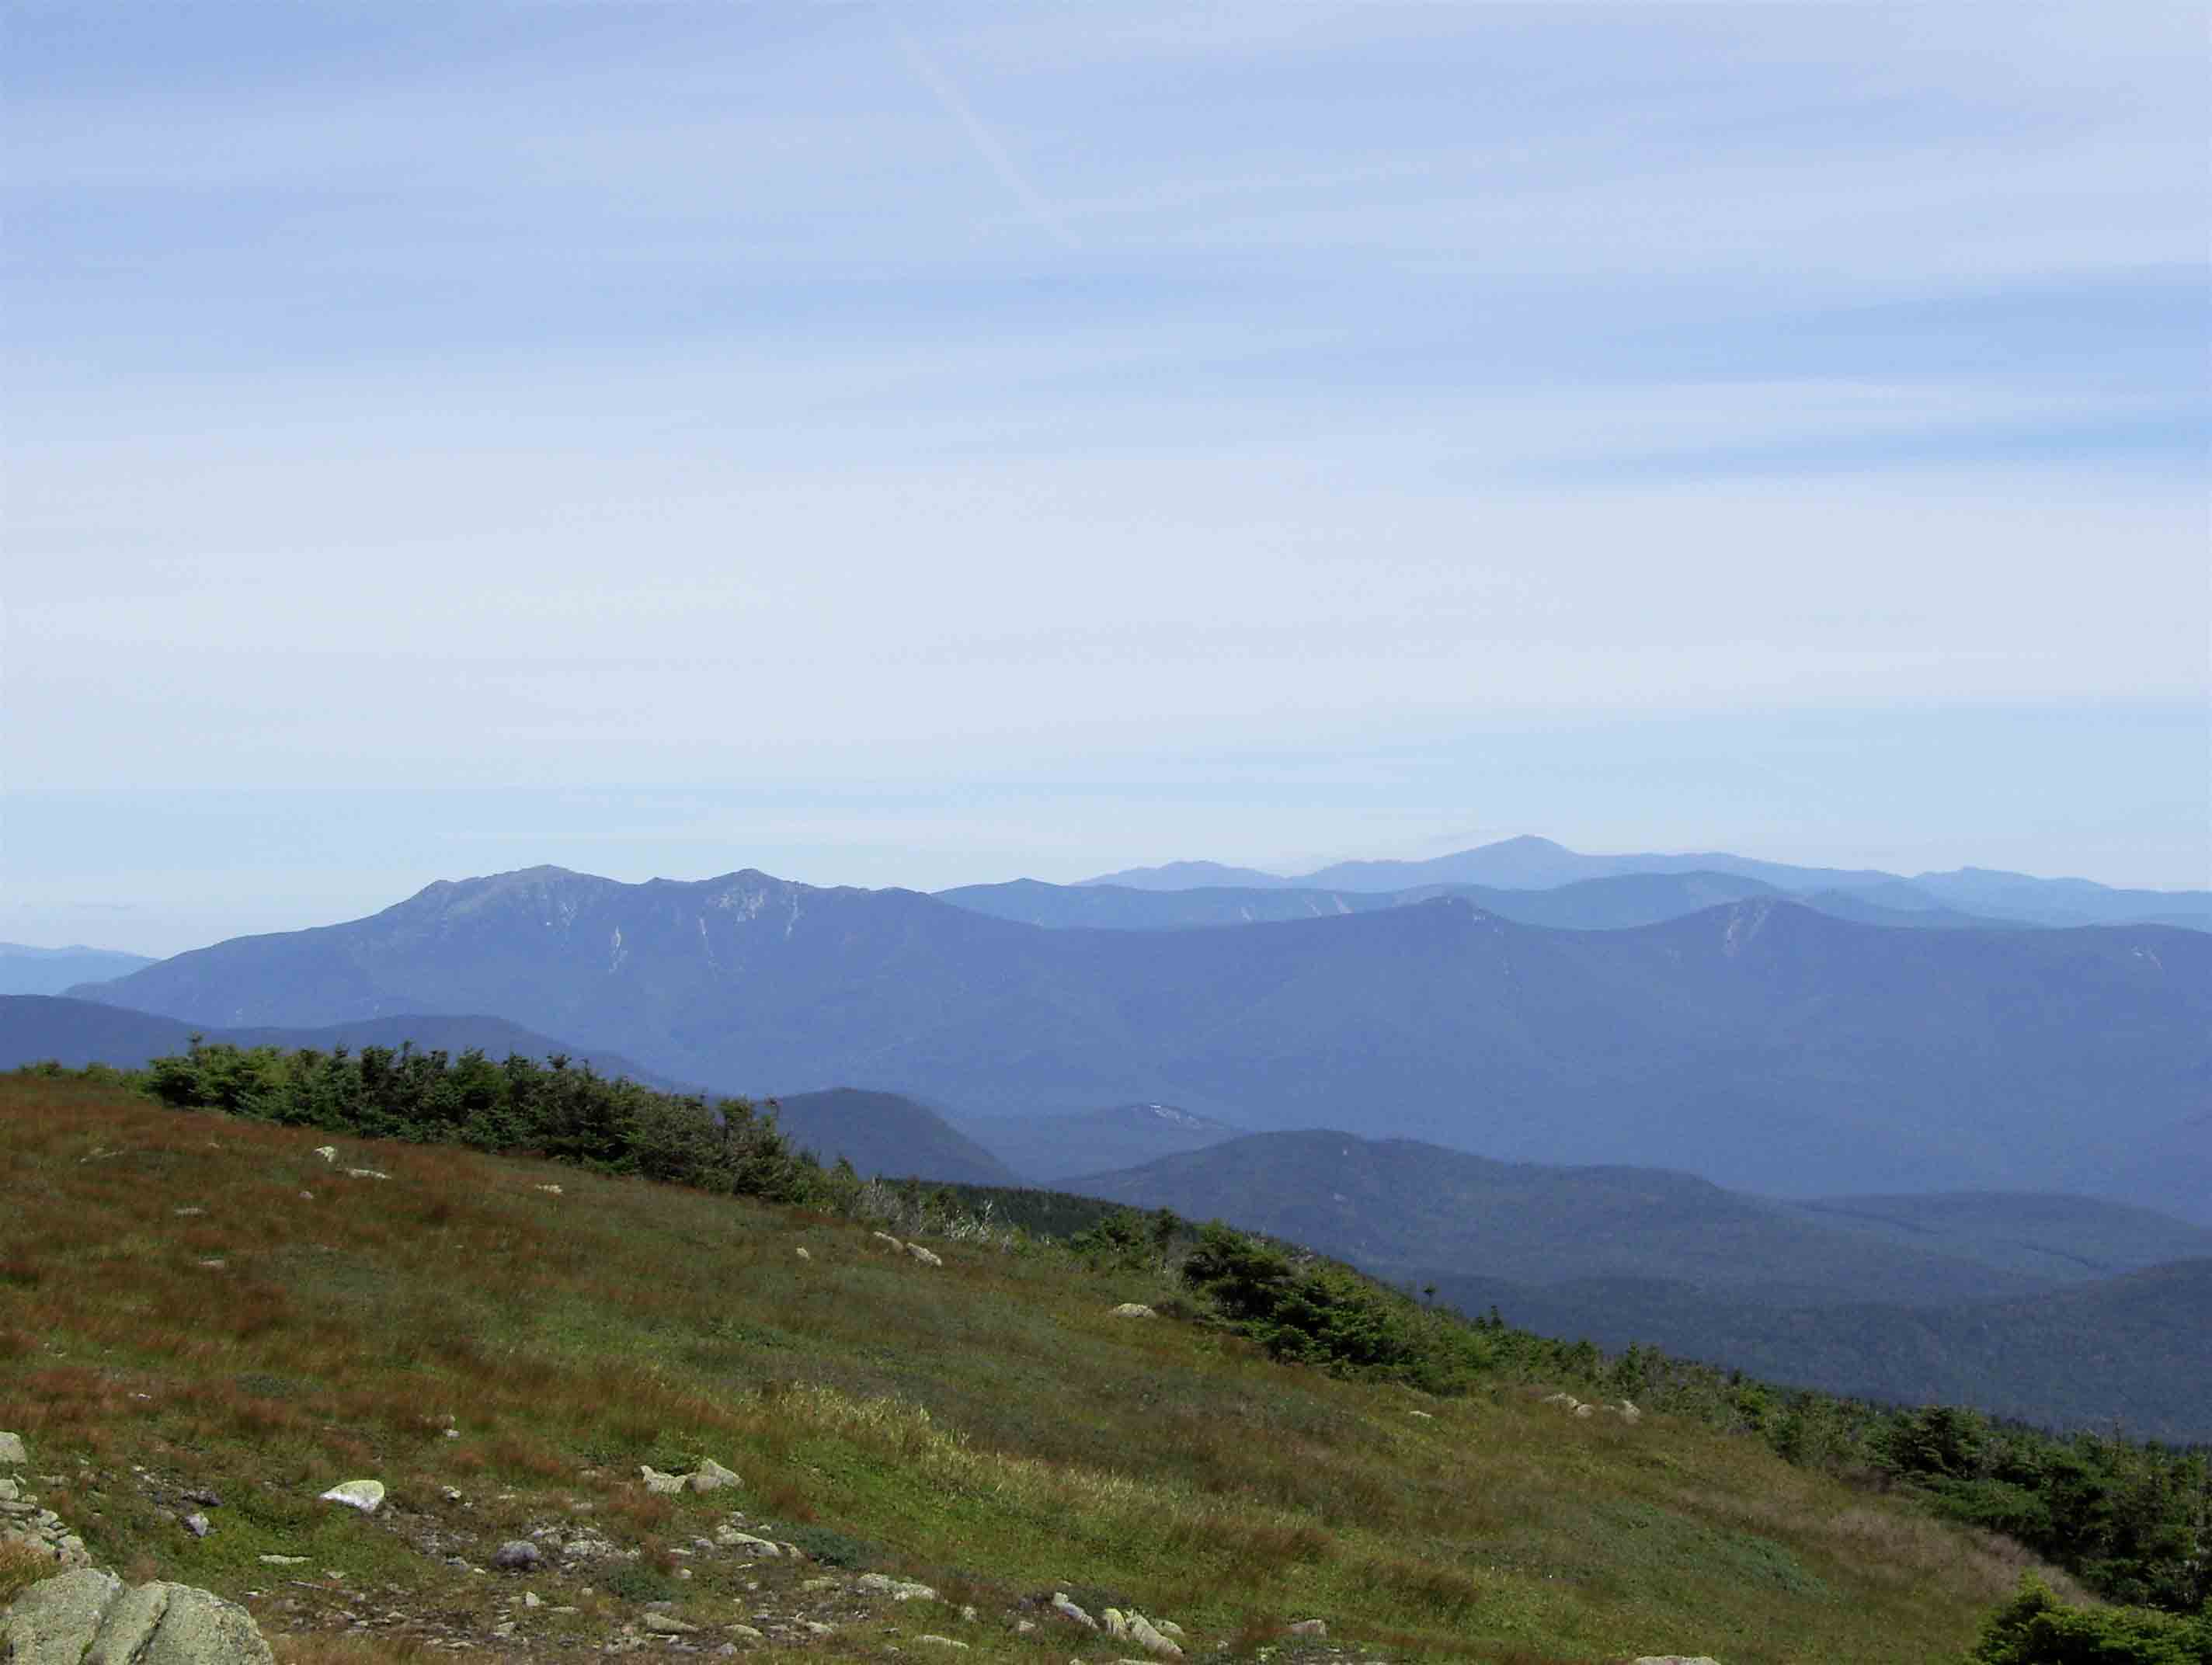 View of most of the central part of the White Mts. as seen from near the summit of Mt. Moosilauke. A plume of dark smoke can be seen just to the left of Mt. Washington, the highest peark in the far distance. This is from the Cog Railway.  Courtesy dlcul@conncoll.edu